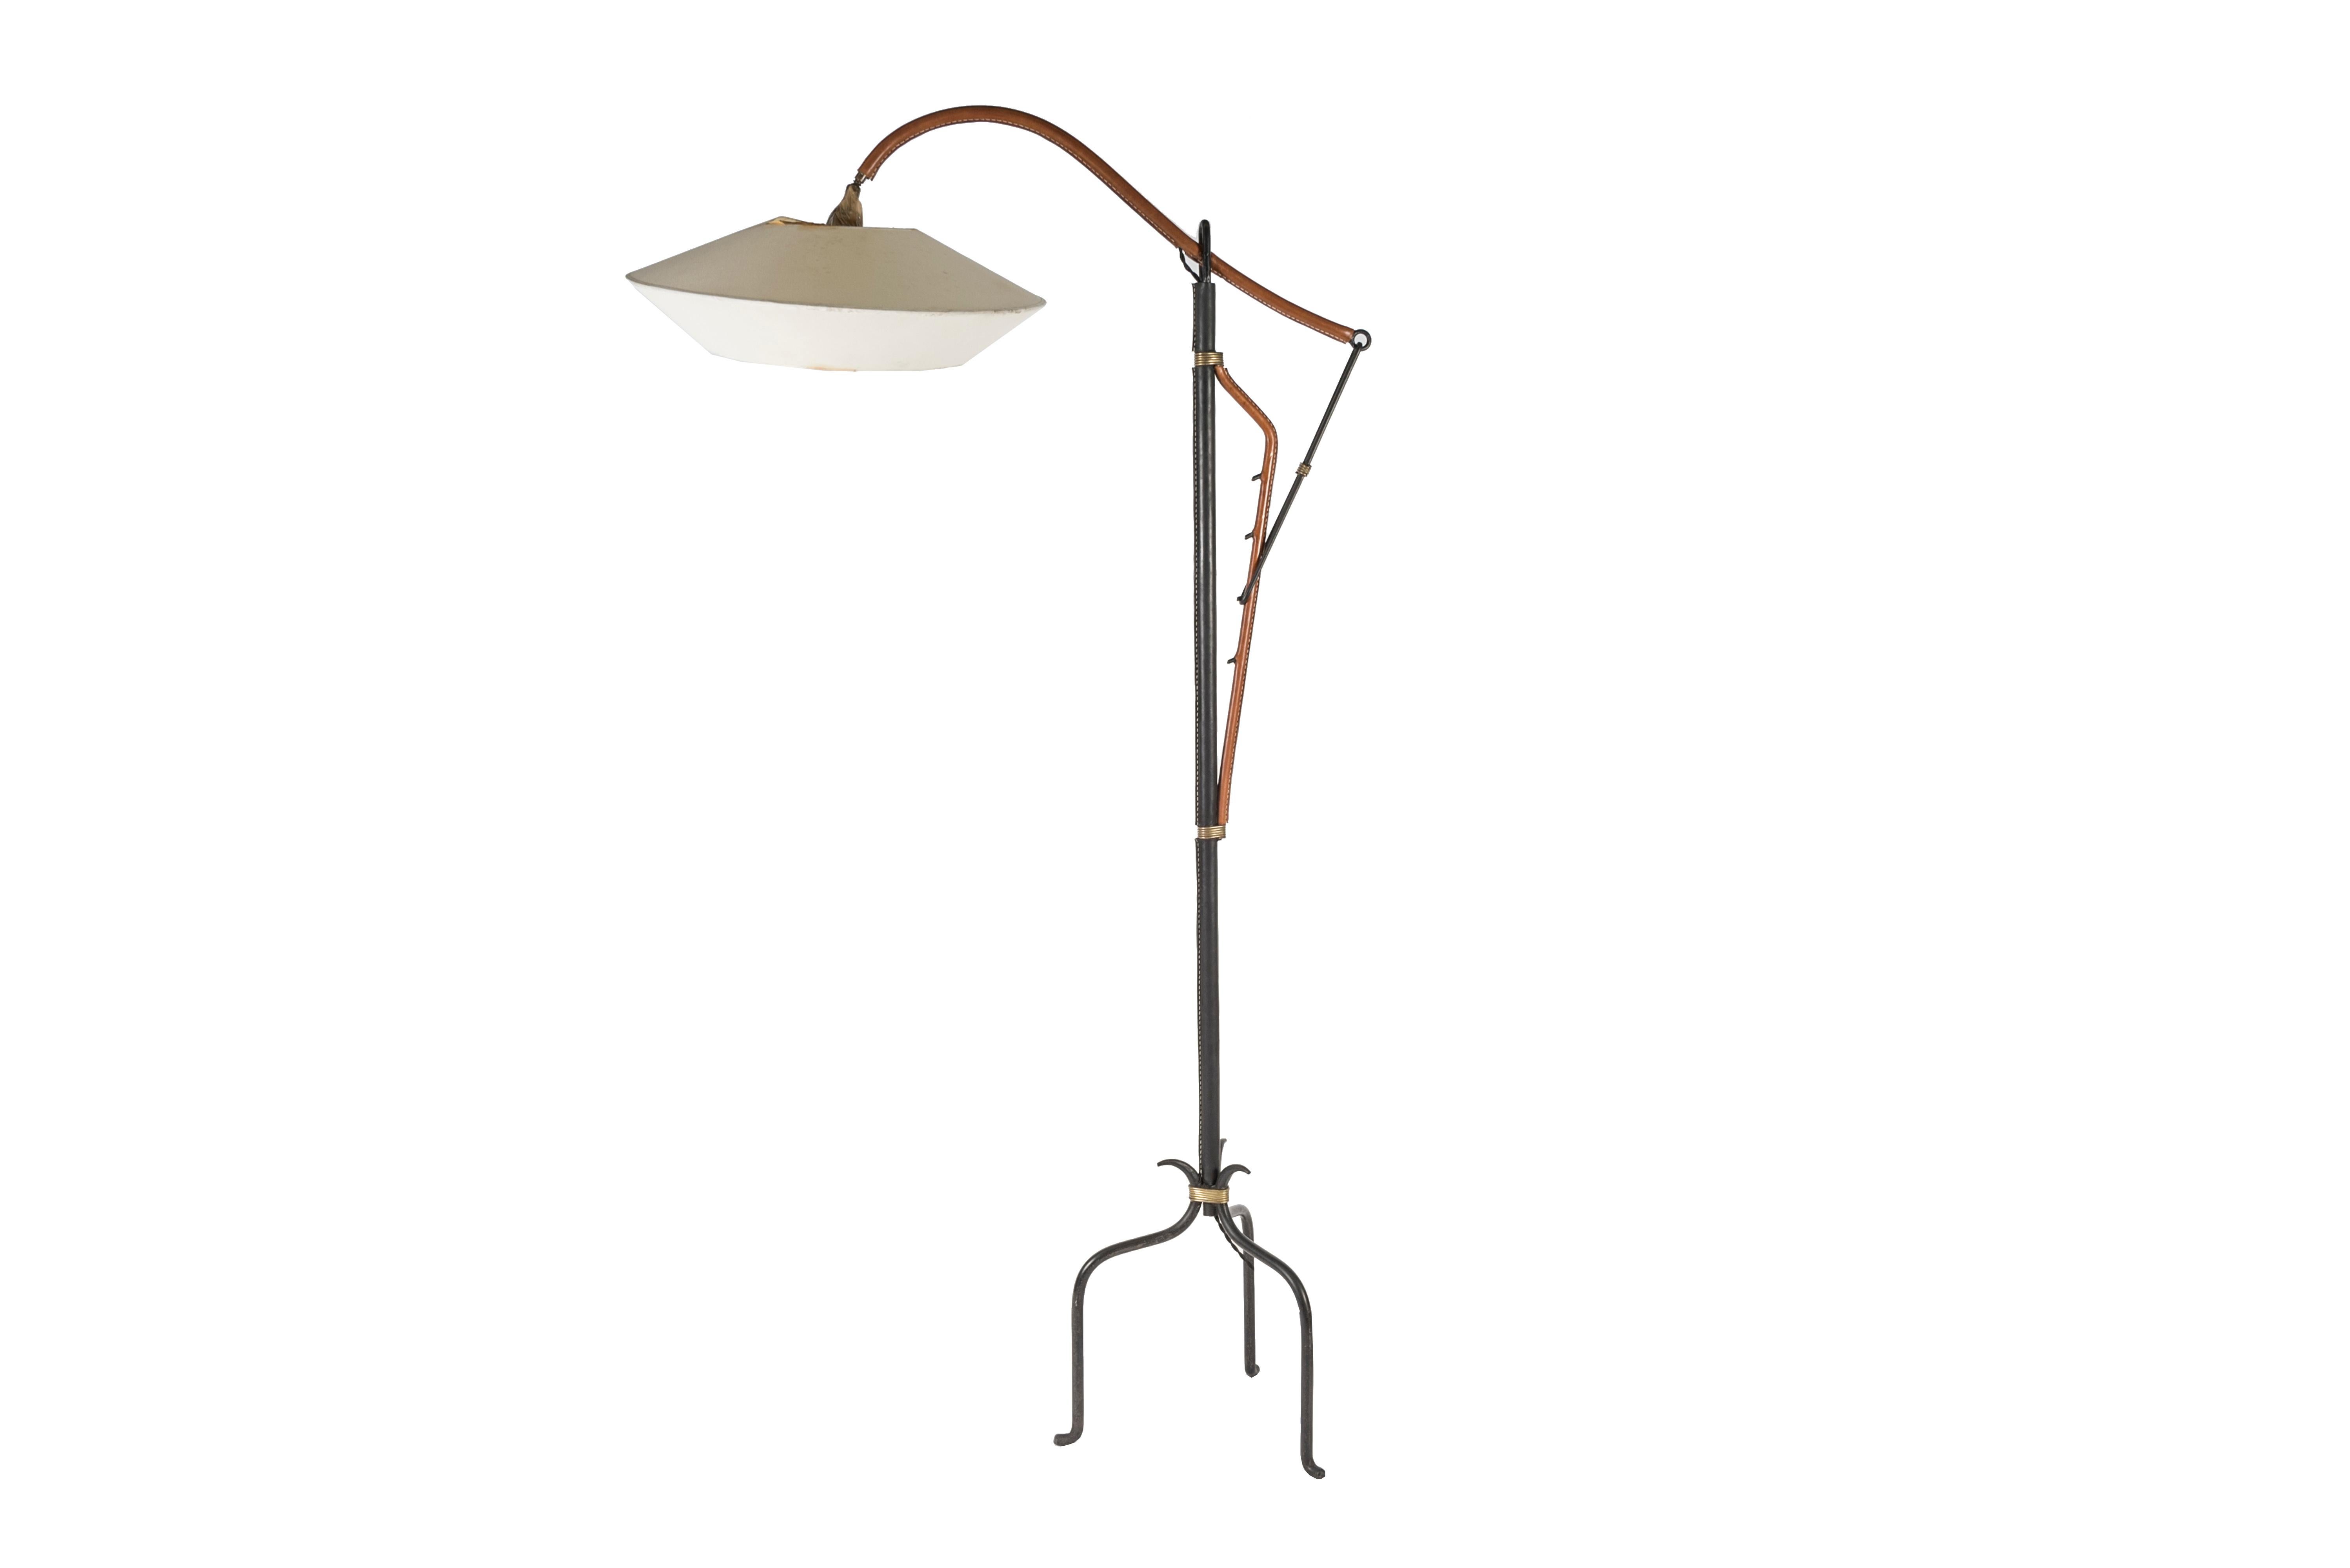 Stunning stitched leather floor lamp by Jacques Adnet
High from 155 to 181 cm
No shade provided
Great shape
1950s
France.
  